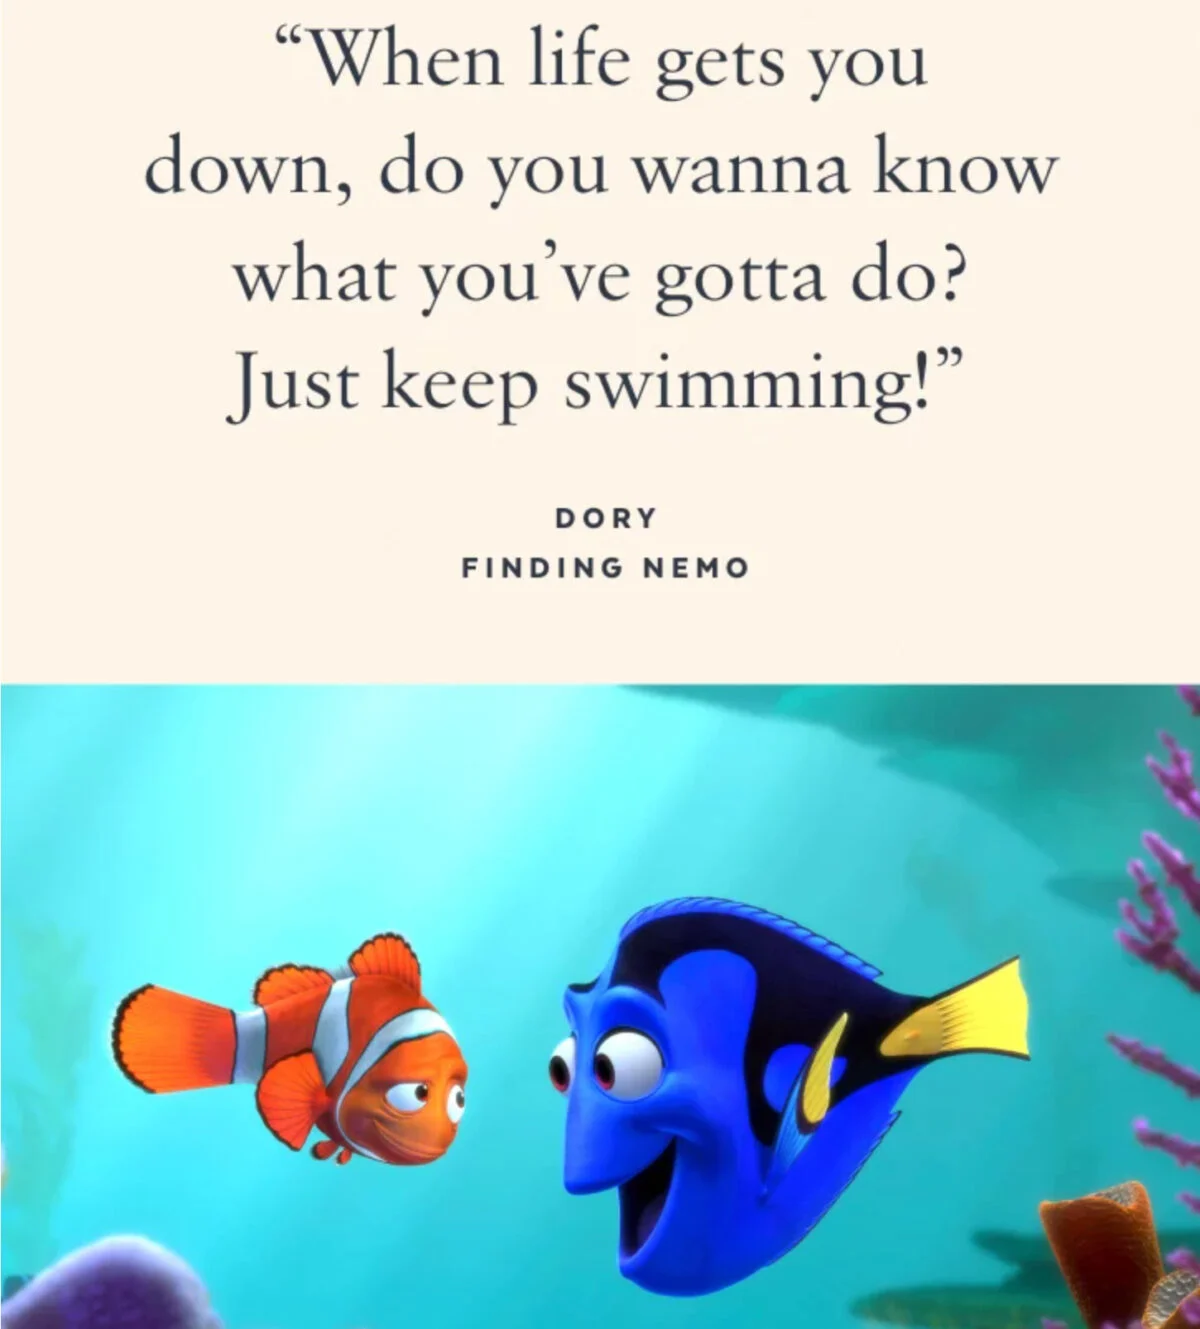 Finding Nemo Quote and Meme - The Best Disney Memes On The Internet